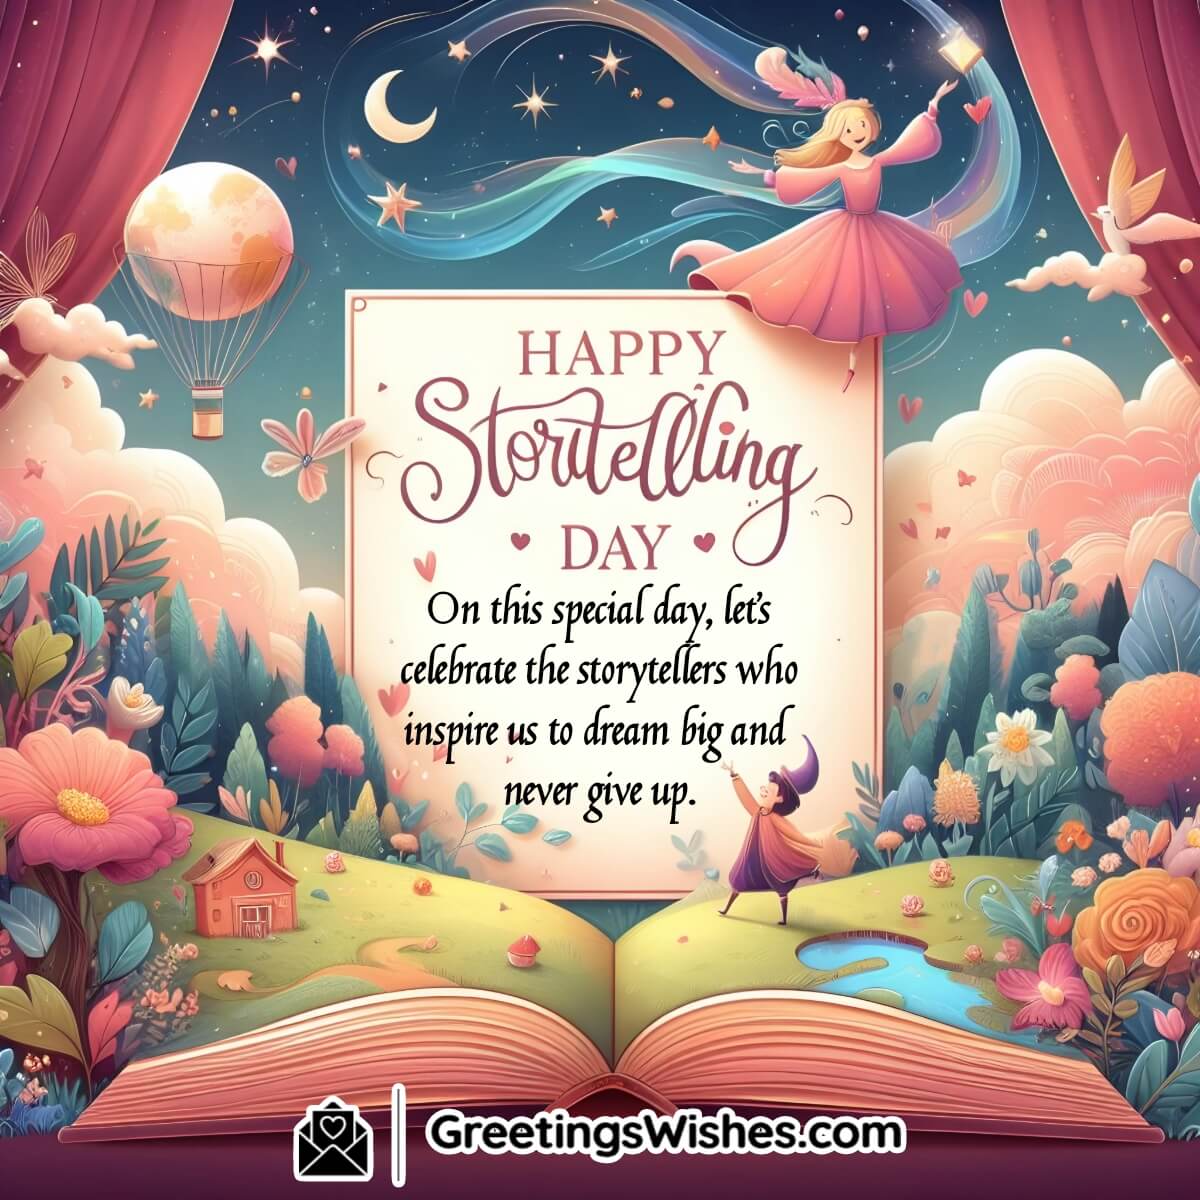 Happy Storytelling Day Message